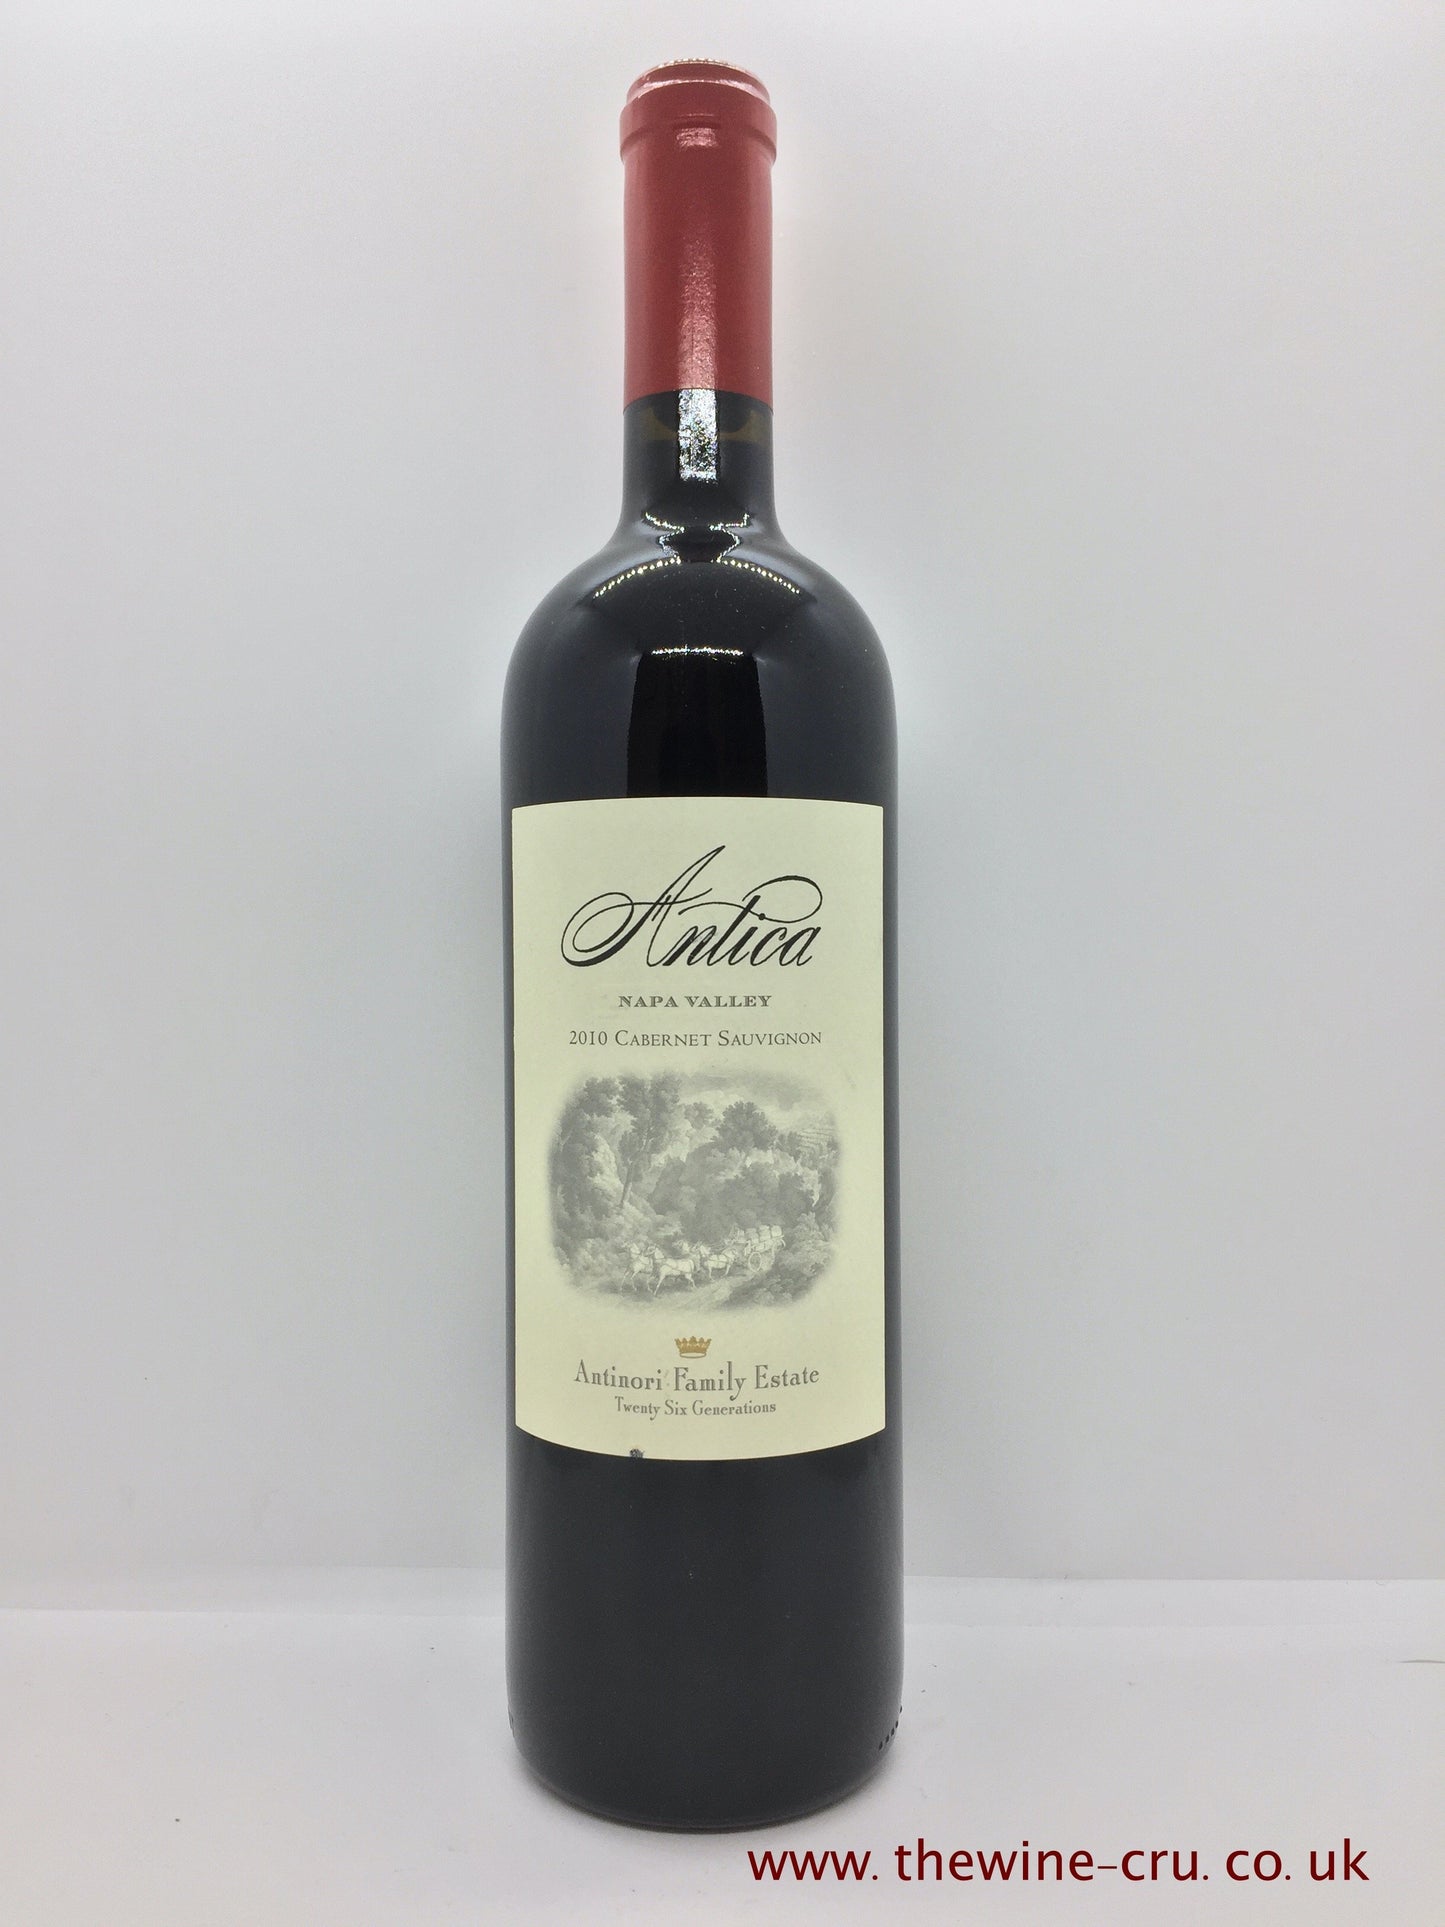 A 2010 vintage red wine from USA available for immediate delivery. Antica Napa Valley 2010 Cabernet Sauvignon